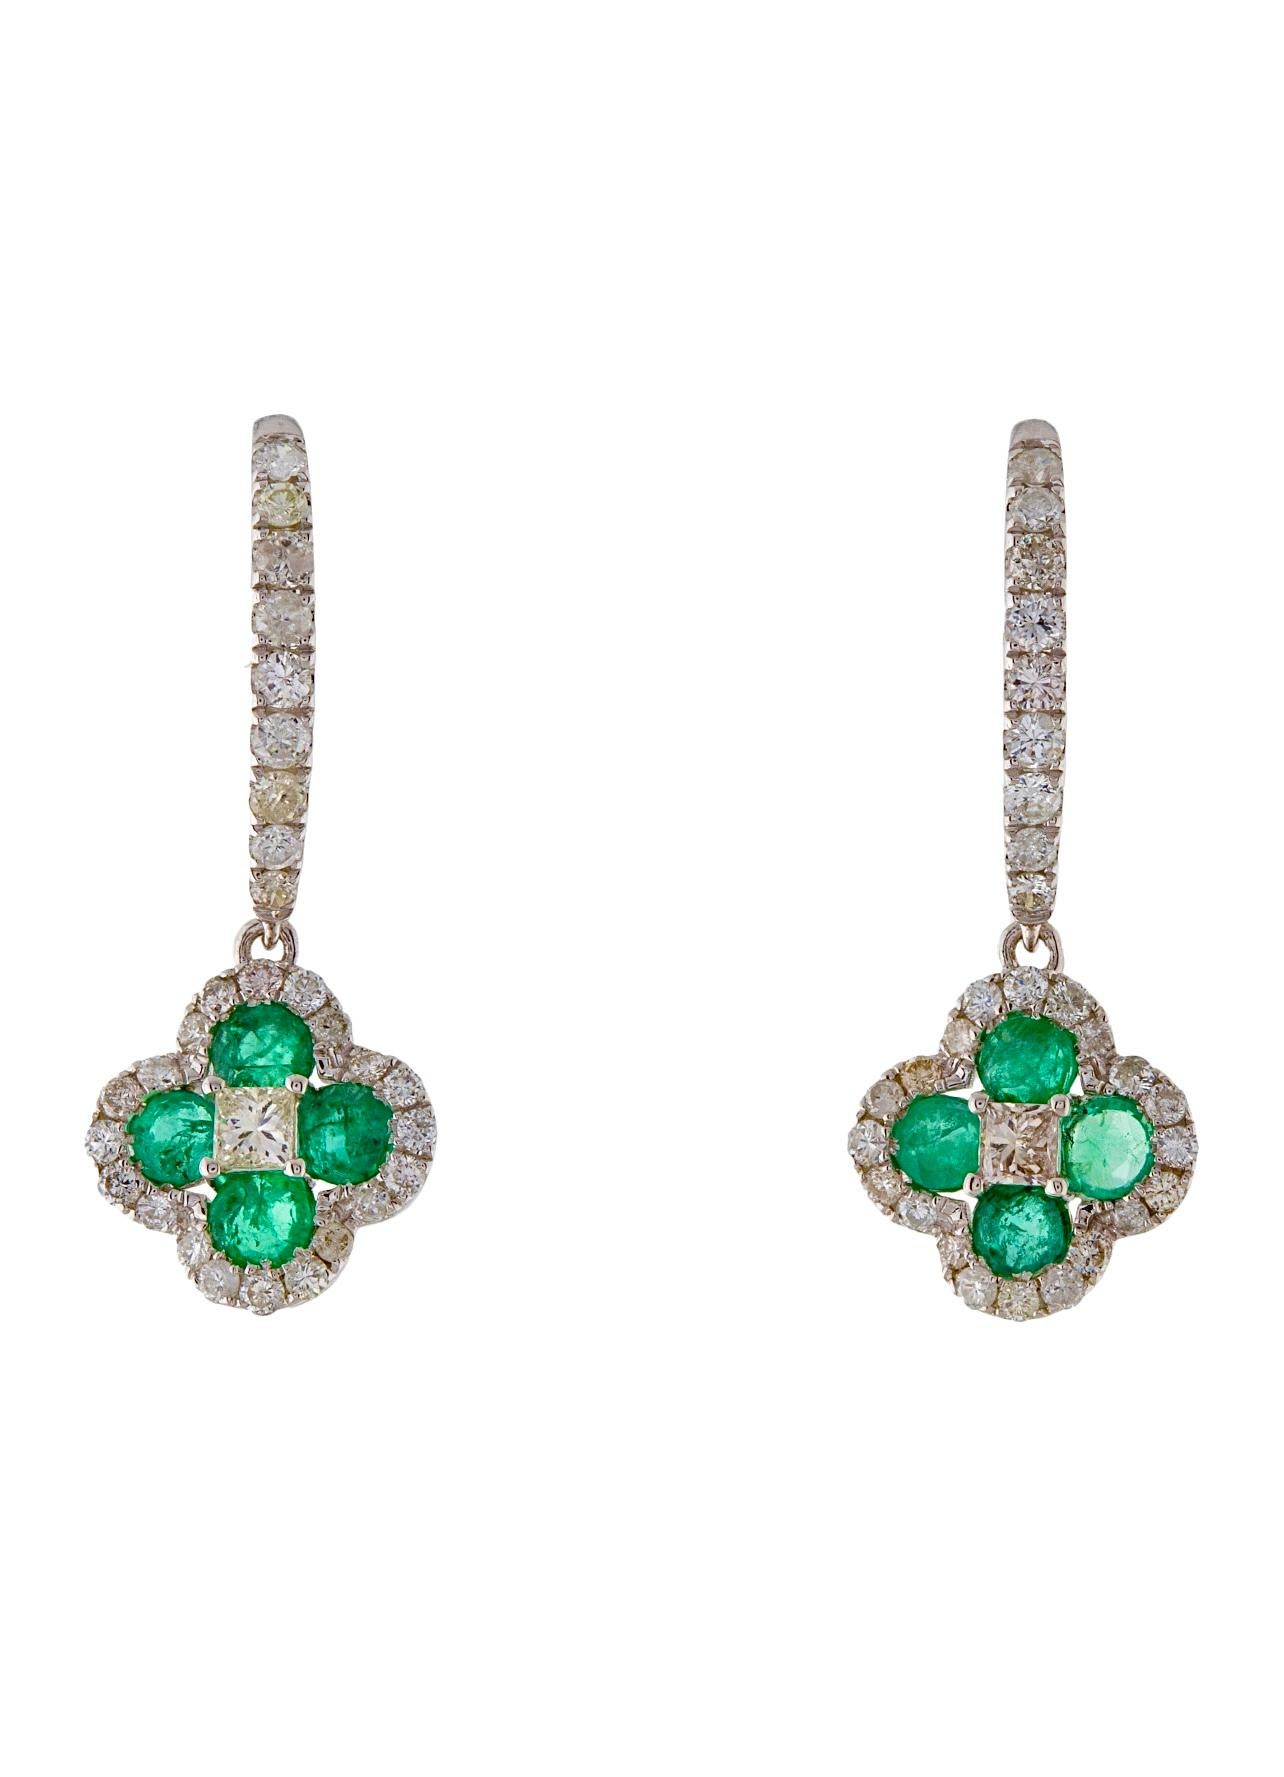 Enchanting 14k Green Emerald .90 crt Gems w/ .93 crt Diamond Drop Earrings

Experience the spellbinding allure of these Enchanting 14k Green Emerald Earrings, where nature's beauty takes center stage. Adorned with exquisite .90 carat gems, each